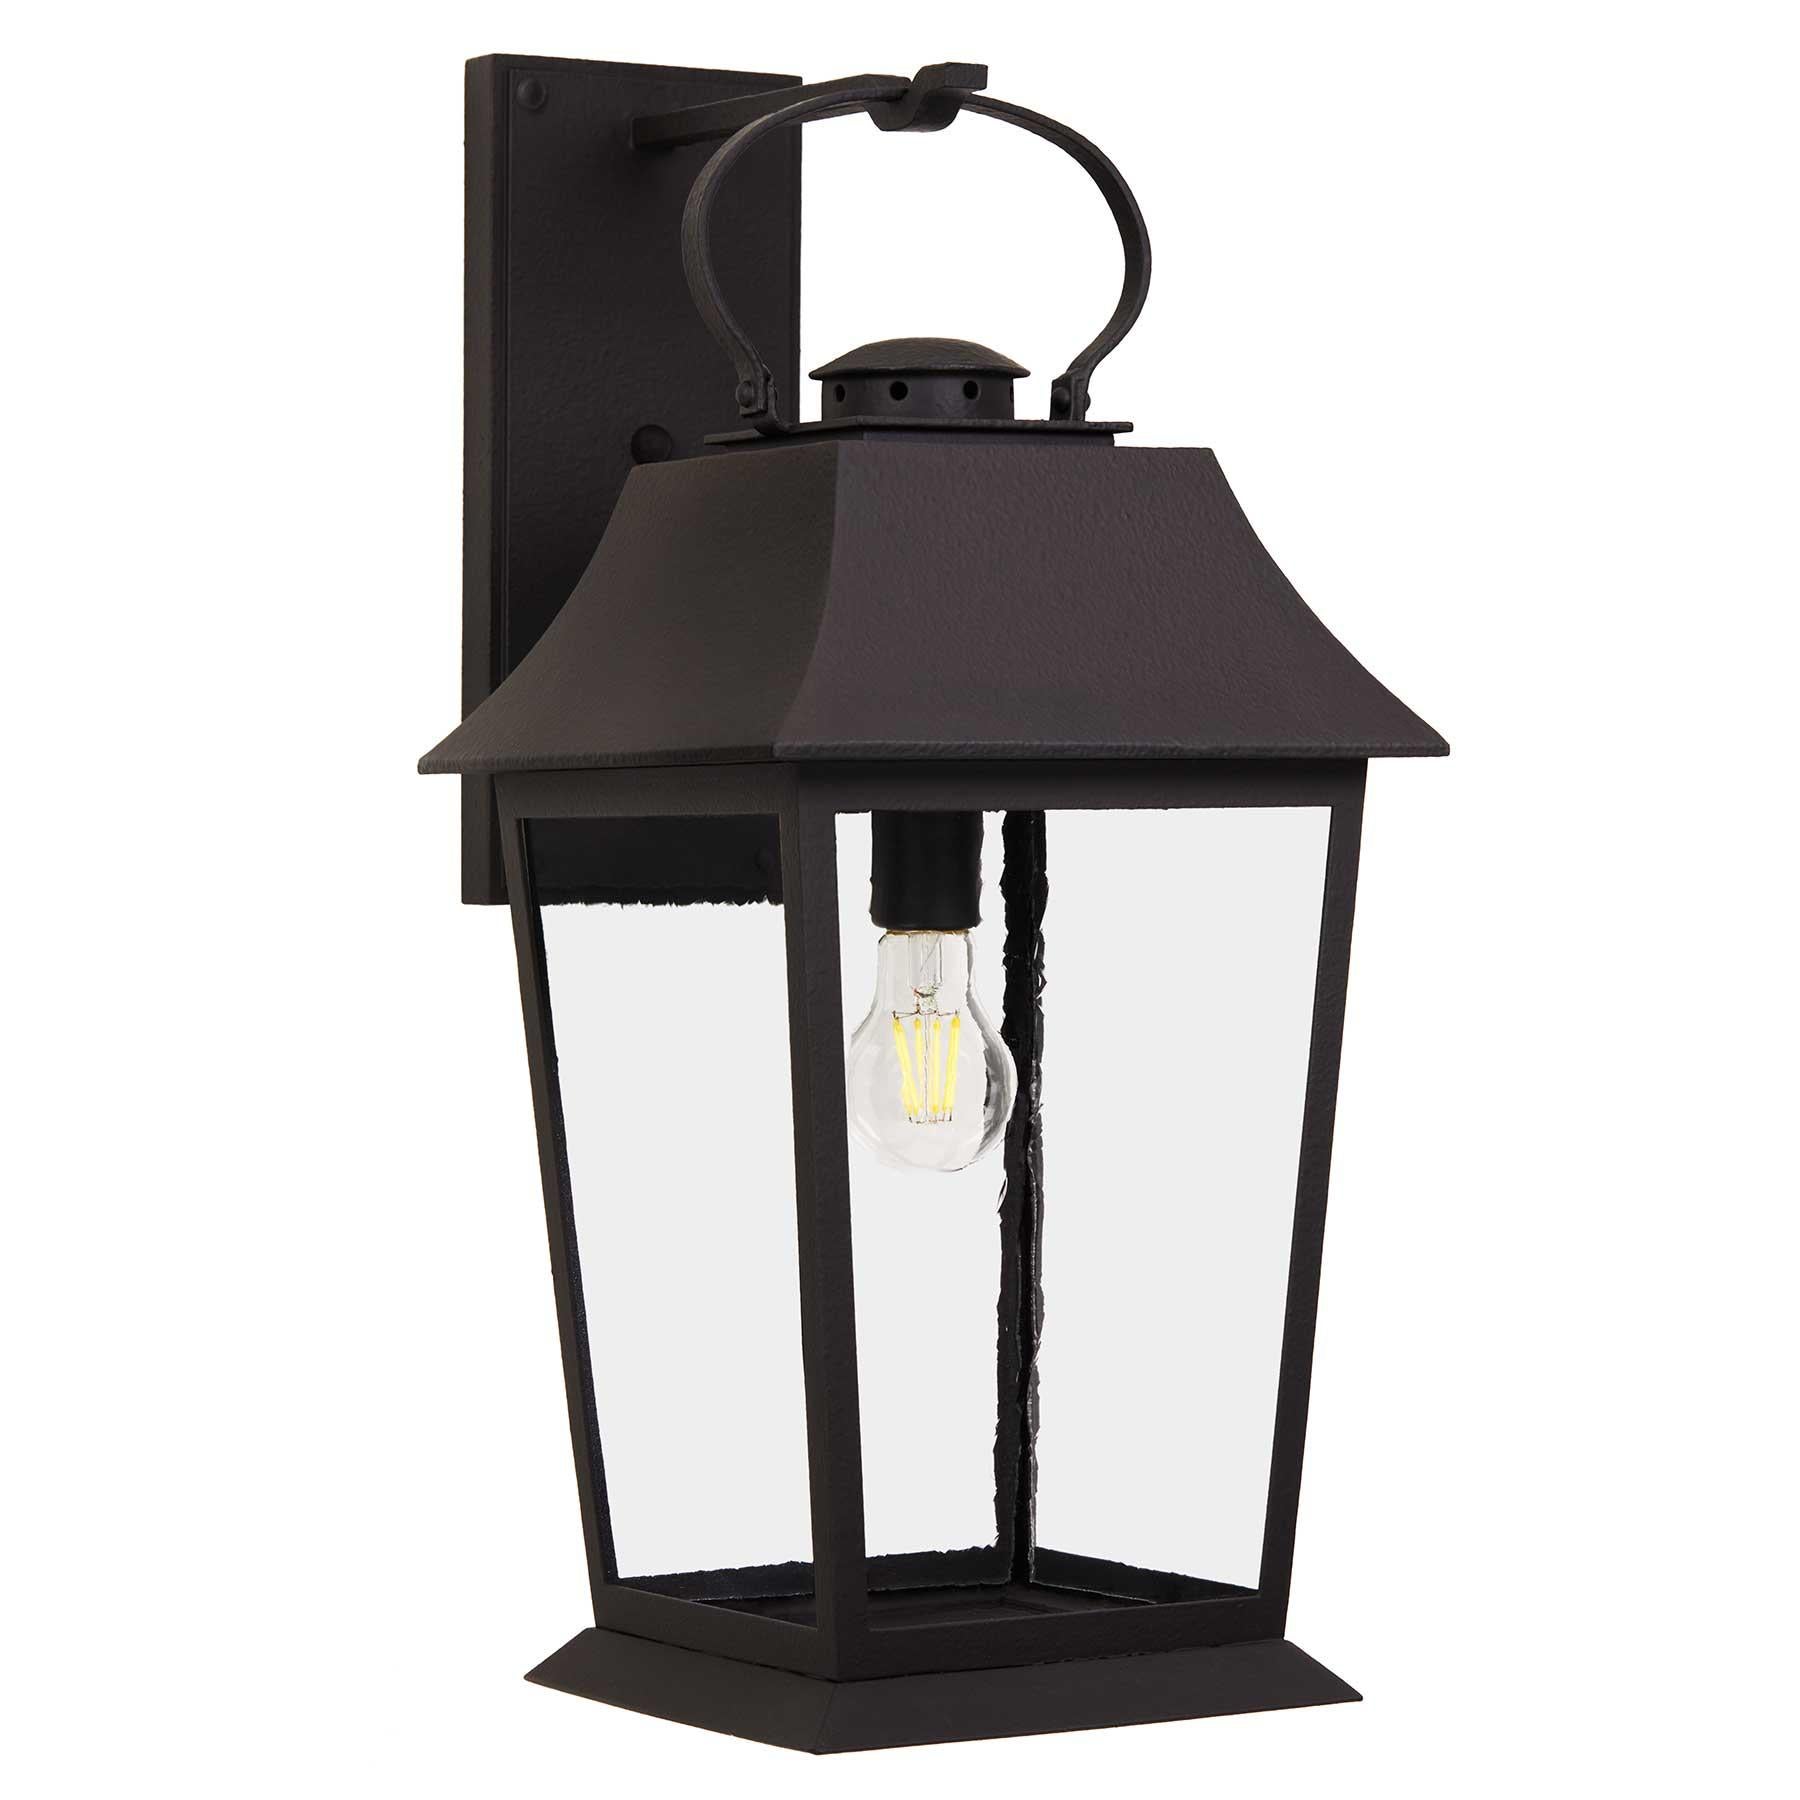 Our Biltmore lantern echoes the casual sophistication of Santa Barbara's historic California hotel of the same name. The Biltmore wrought iron lantern would be perfectly at home amidst the ivory adobe walls, graceful archways and picturesque gardens